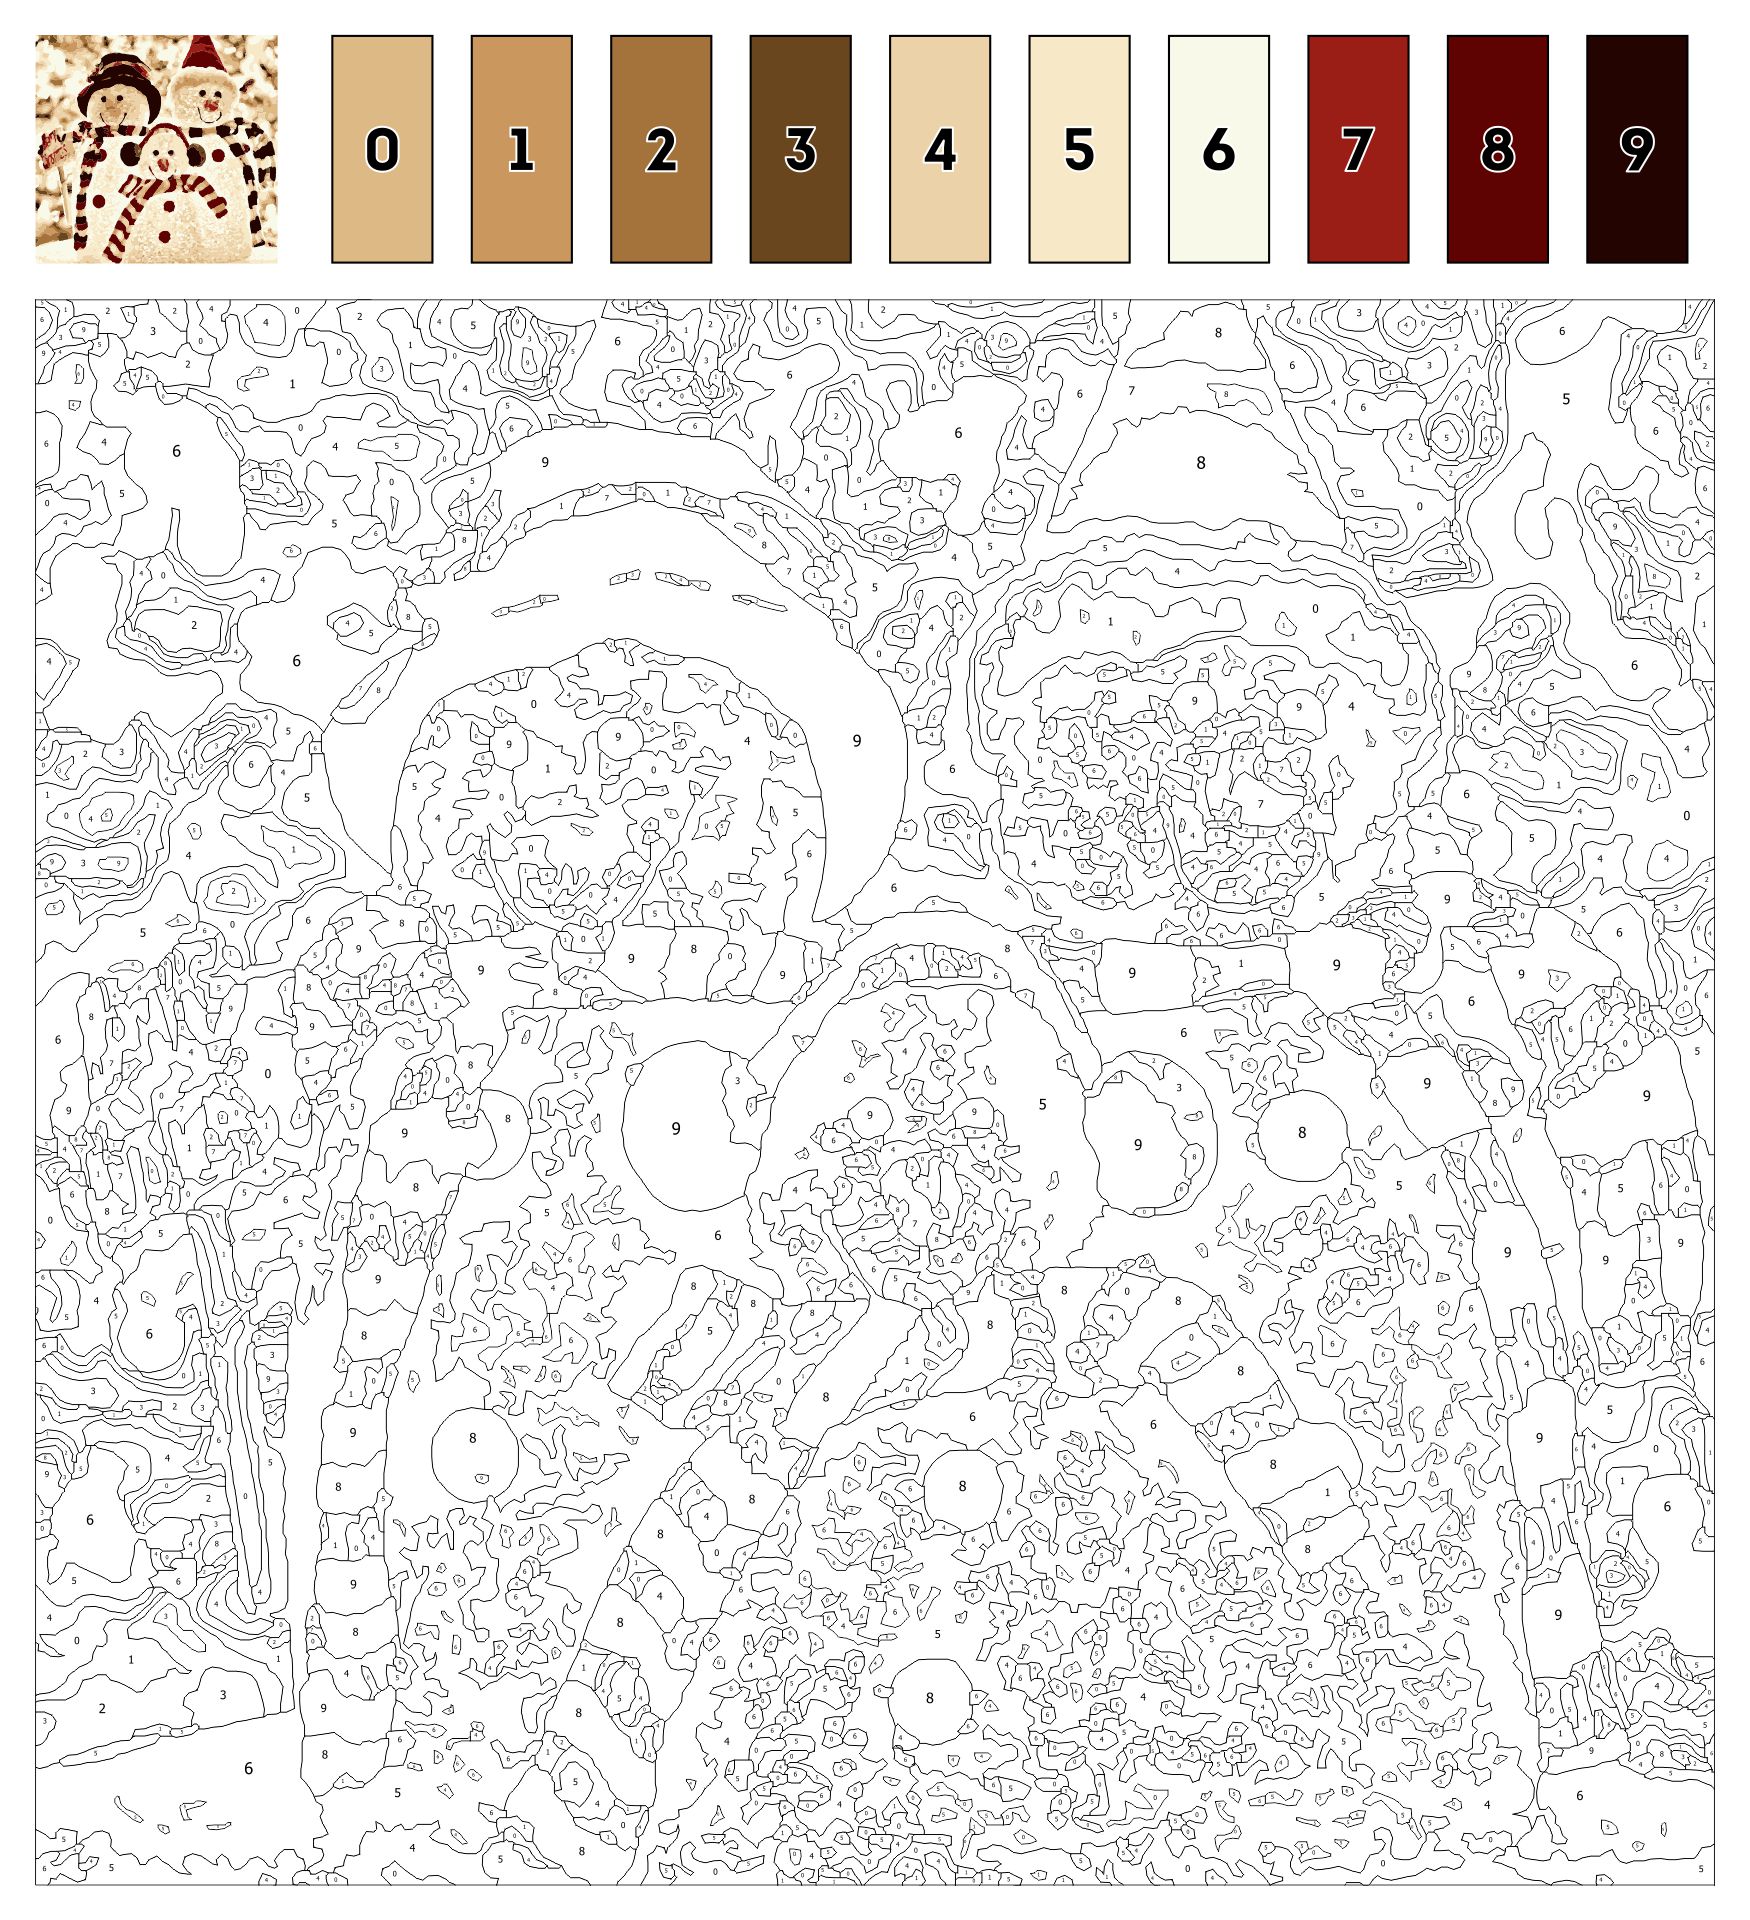 Hard Color by Number Christmas Coloring Pages